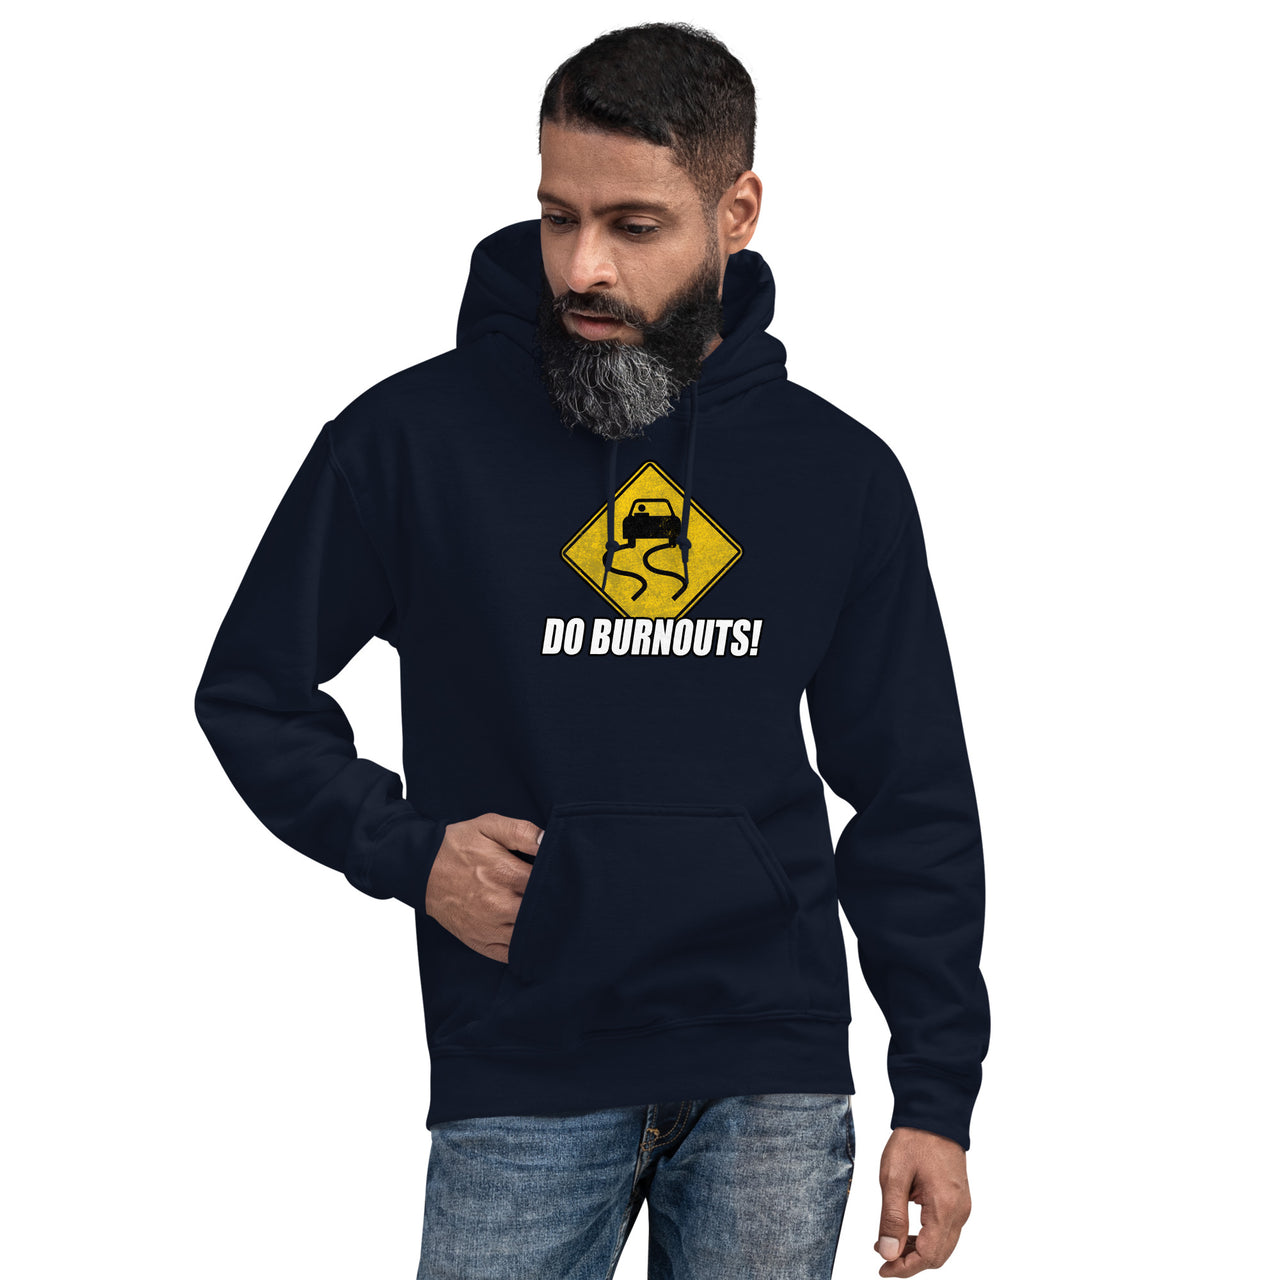 burnout sign hoodie for car enthusiasts modeled in navy